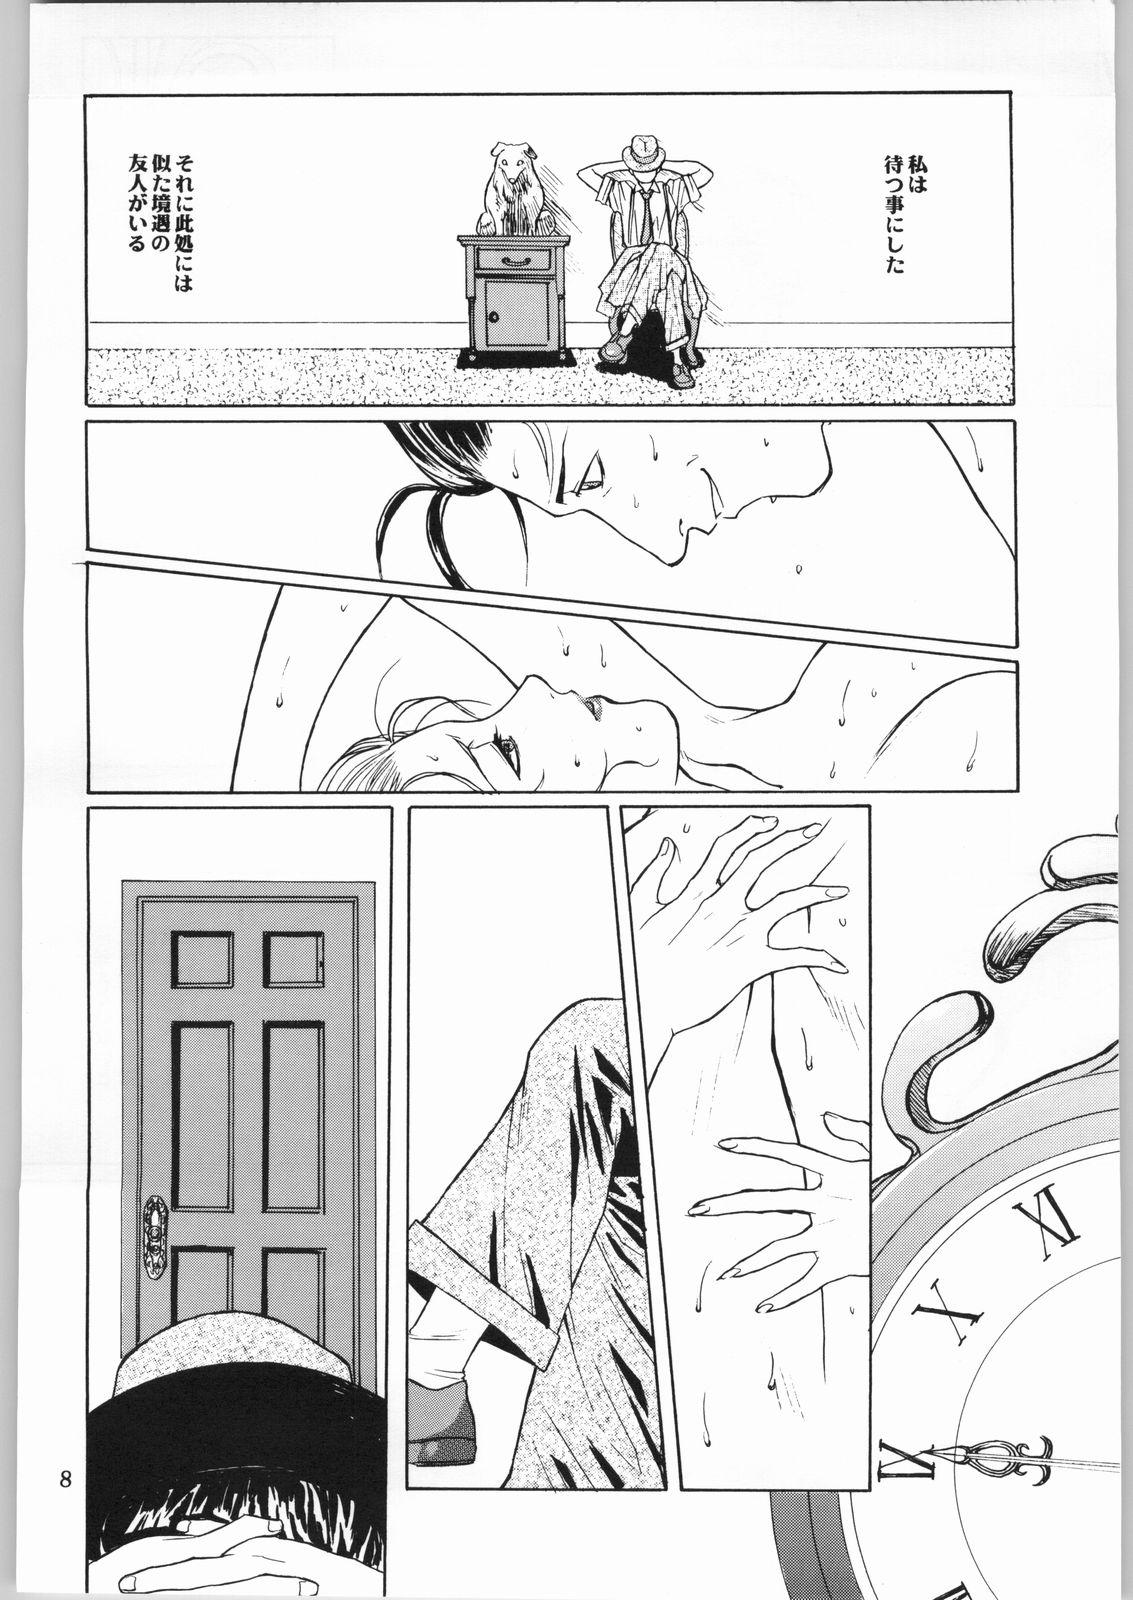 HD Kanojo No Juu - Final fantasy vii Ghost in the shell Tamil - Page 9